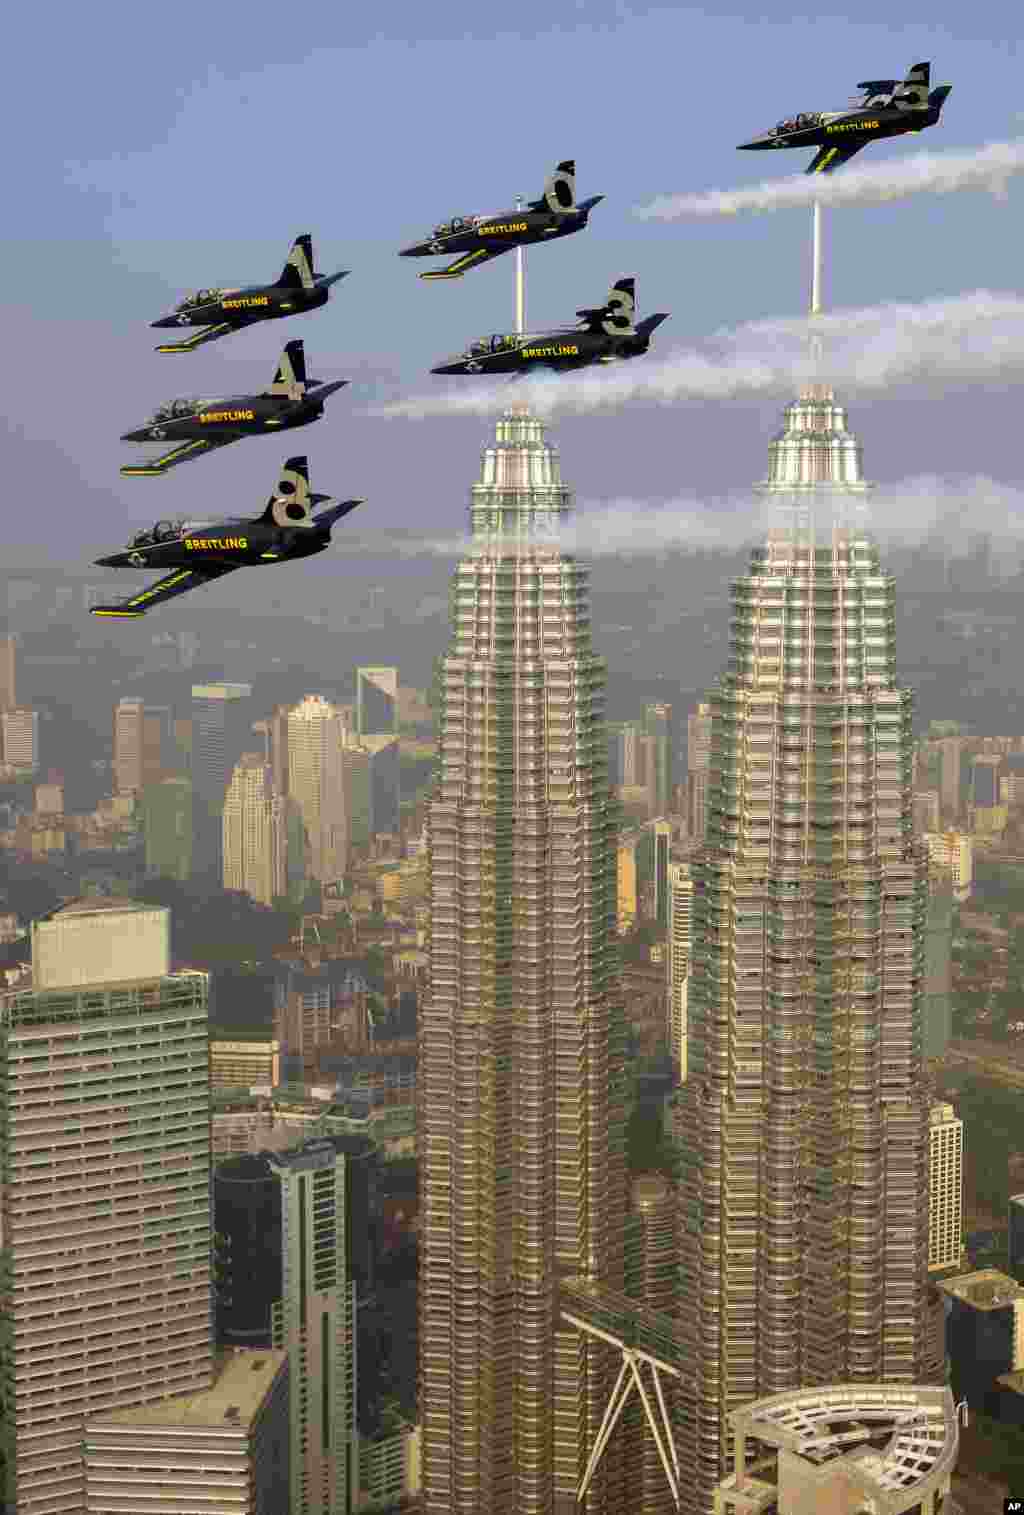 The Breitling Jet Team flies over the Petronas Towers less than 3 metres apart above Kuala Lumpur, Malaysia. The ambassadors for the Swiss luxury watch company Breitling are due to visit Korea and Japan before returning to their home base in Europe.